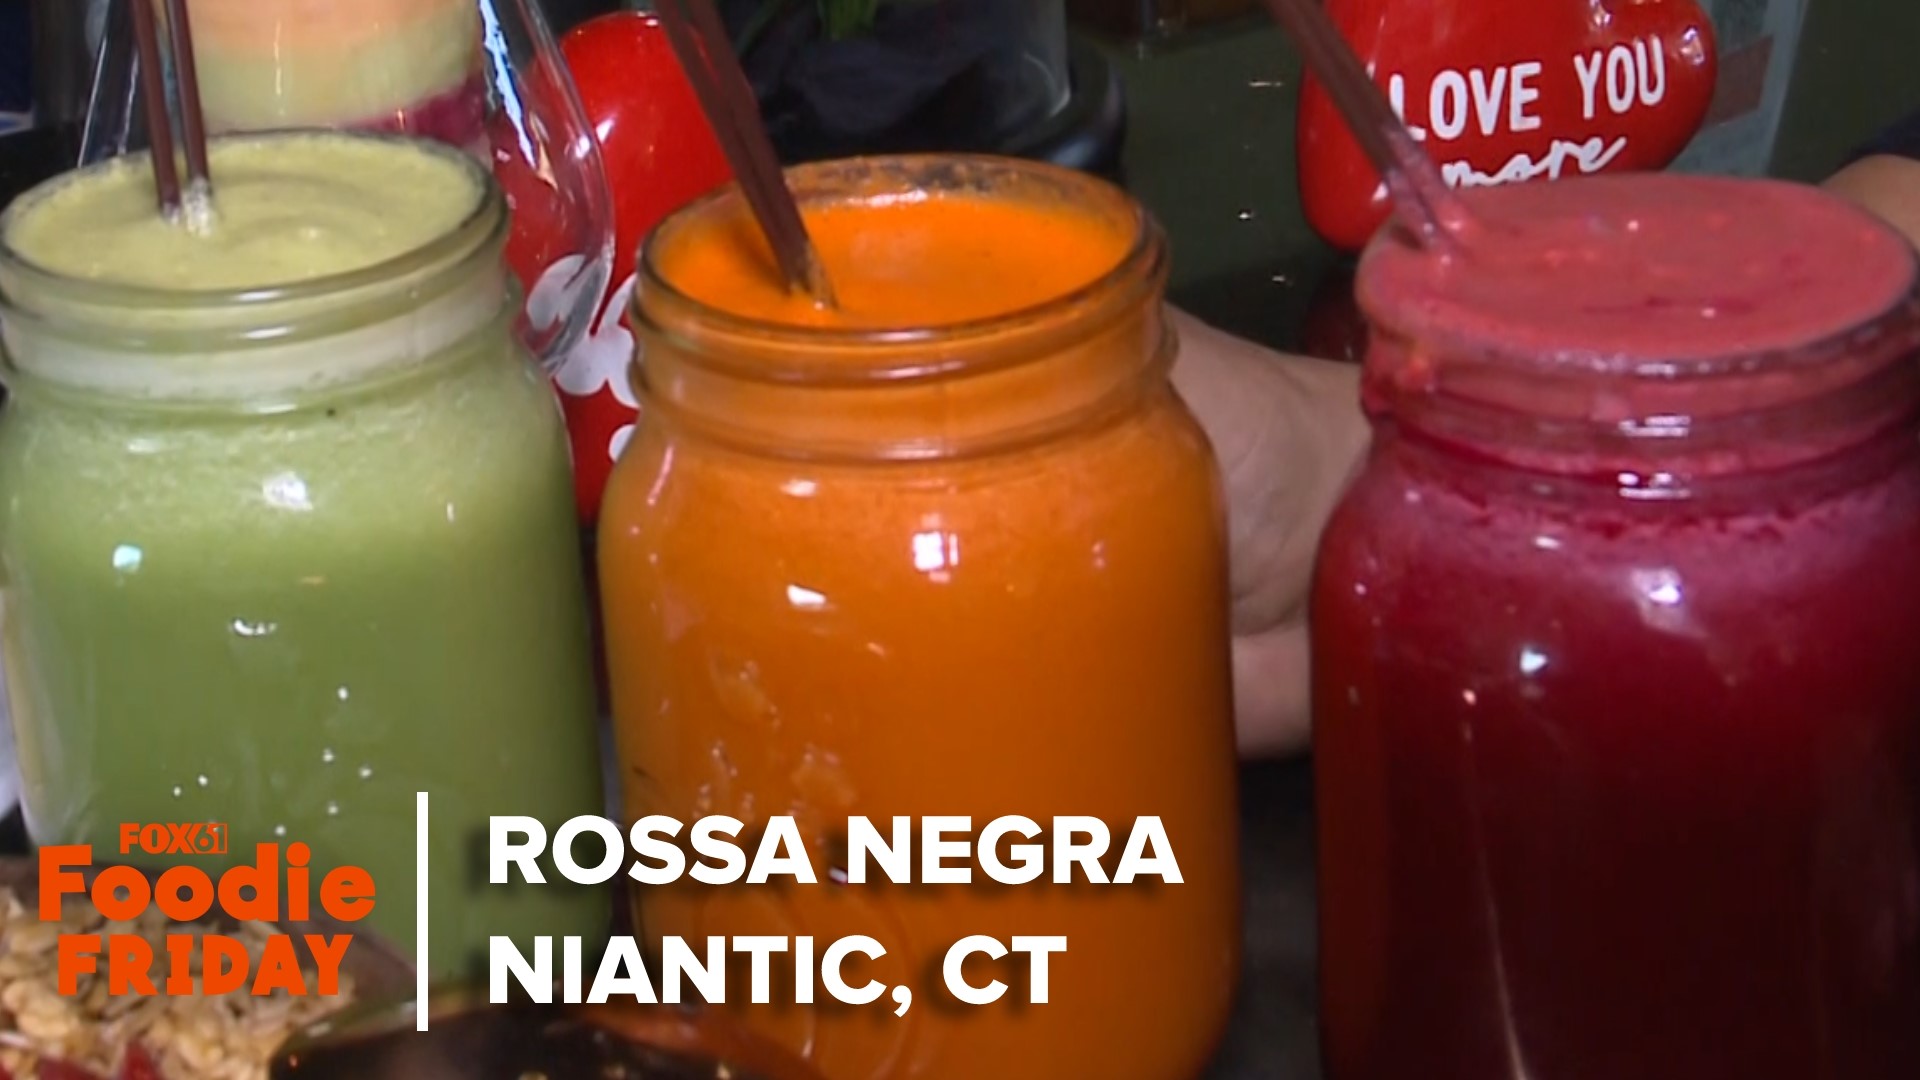 FOX61's Rachel Piscitelli visited Rossa Negra in Niantic to try the area's first International Fusion Cuisine Restaurant and Juice Bar.